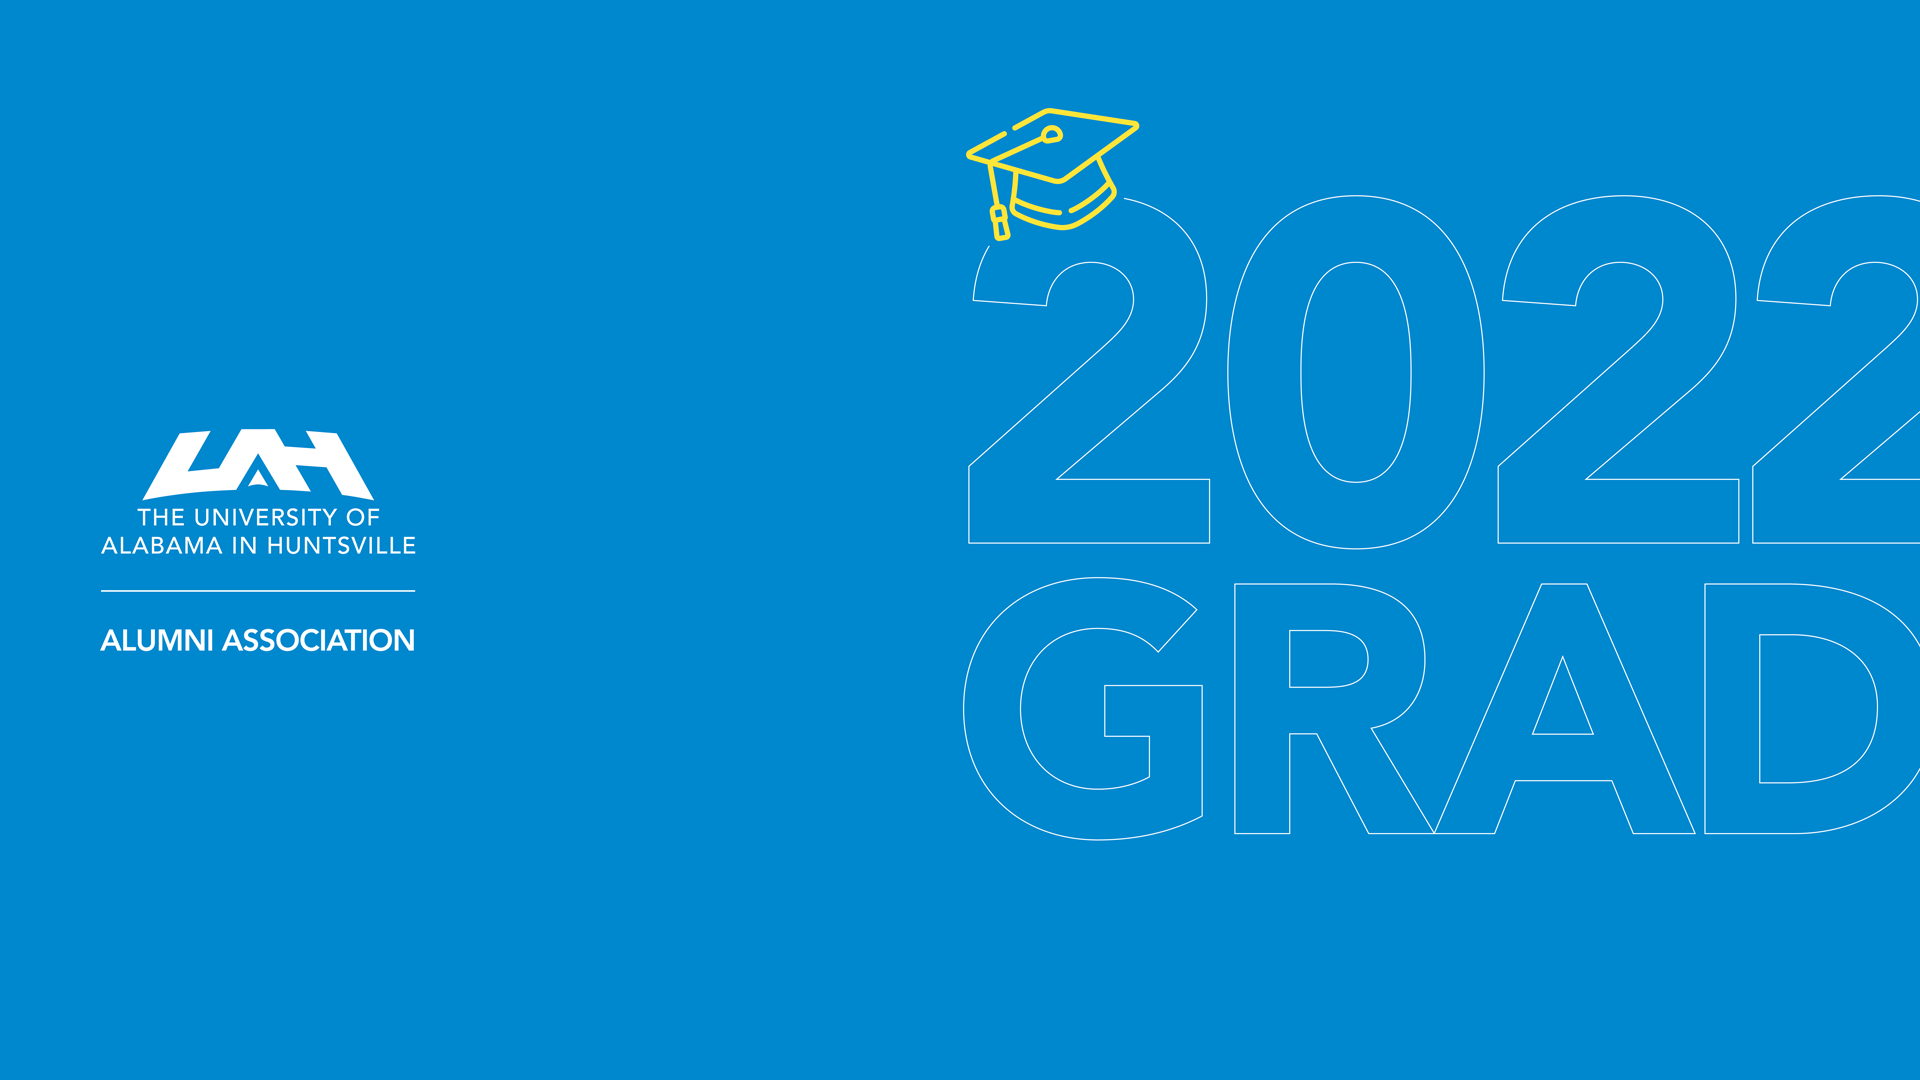 uah zoom plain blue background with alumni logo and text that says 2021 grad